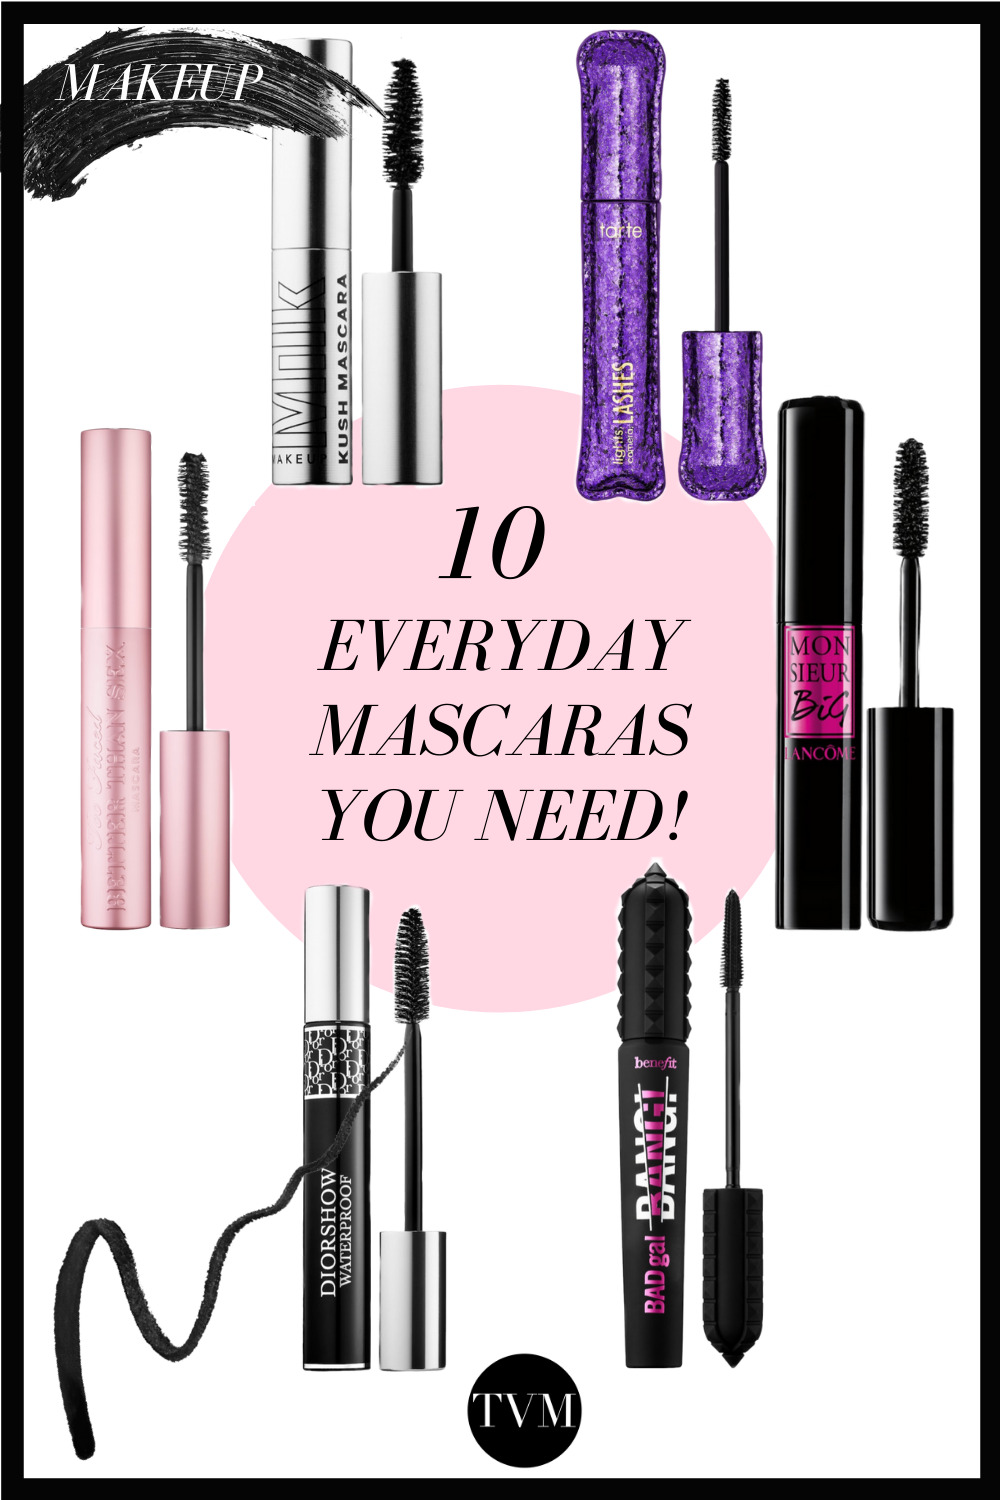 Mascaras are a must-have! You can skip every step but the mascara! Here you will find a selection of the 10 everyday mascaras you need!